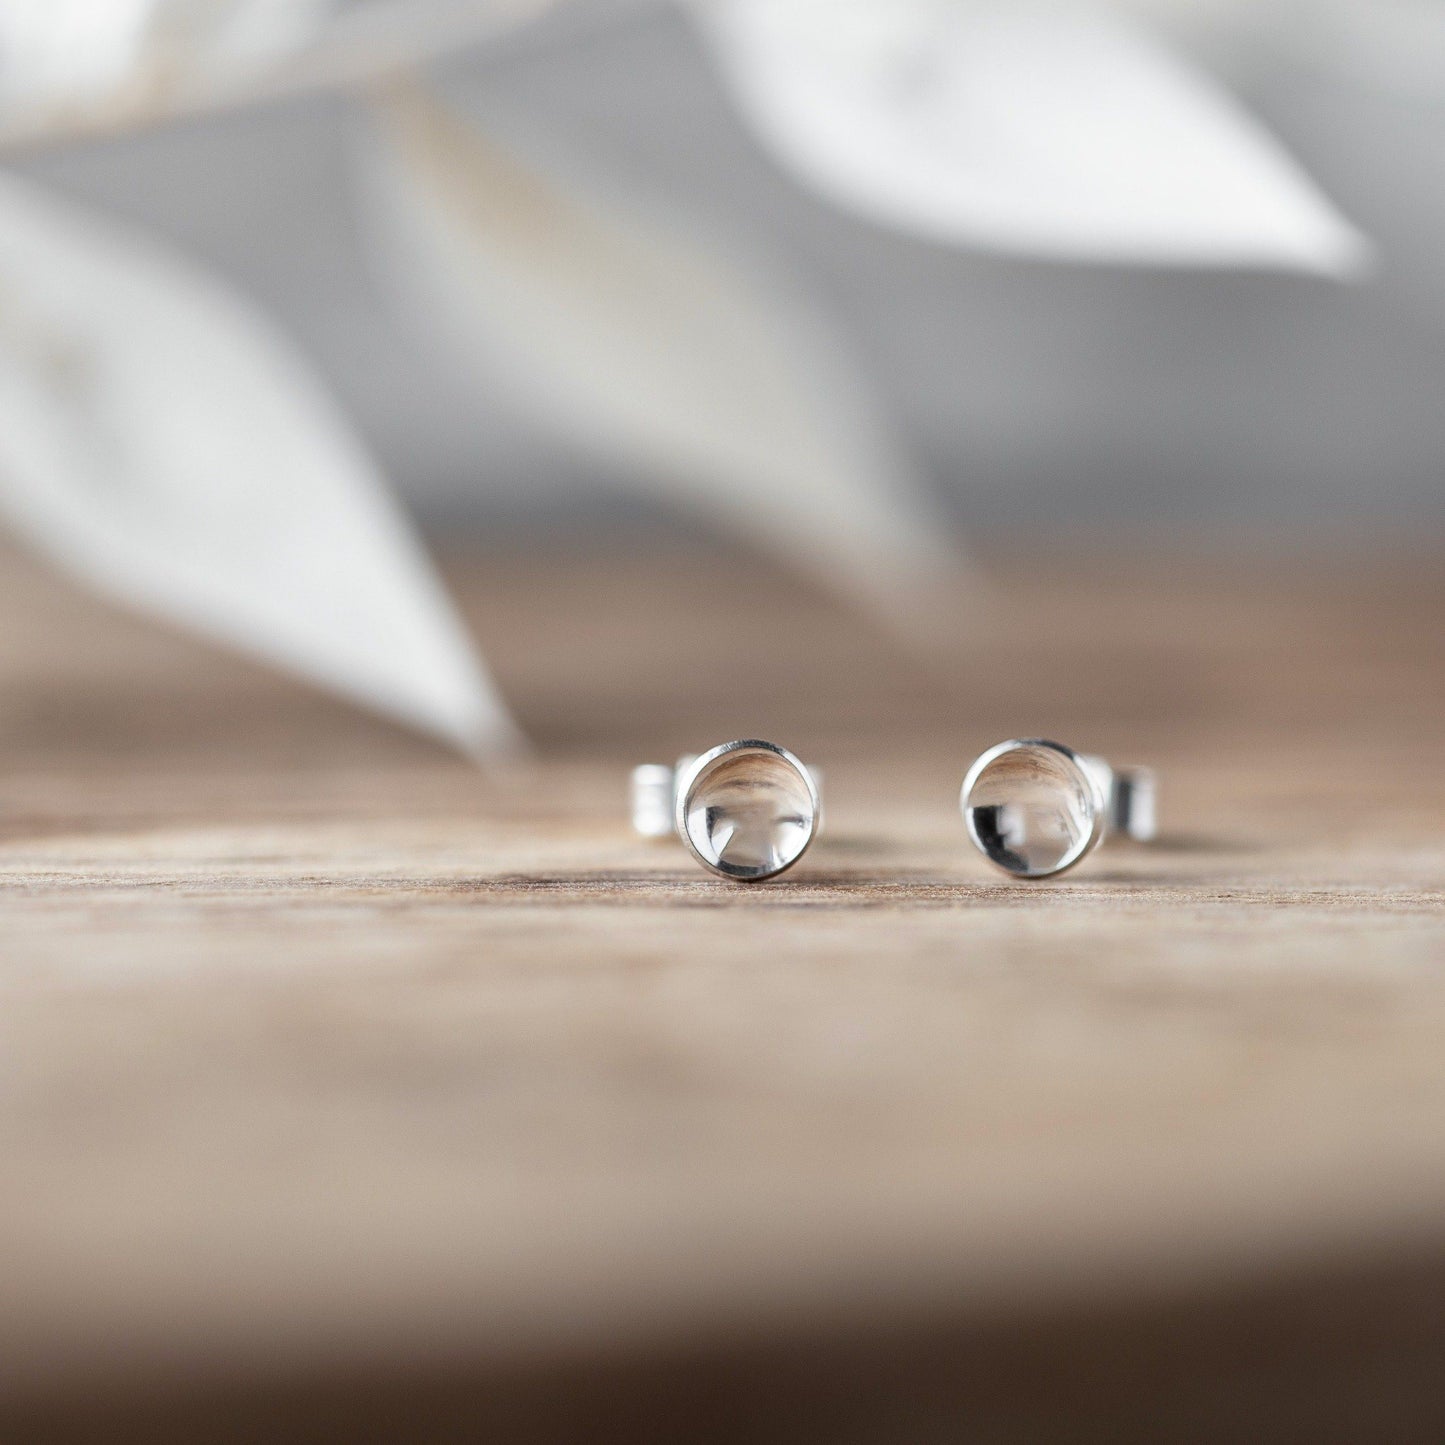 Tiny Silver Domed Studs Earrings made by Anna Calvert Jewellery  in the UK